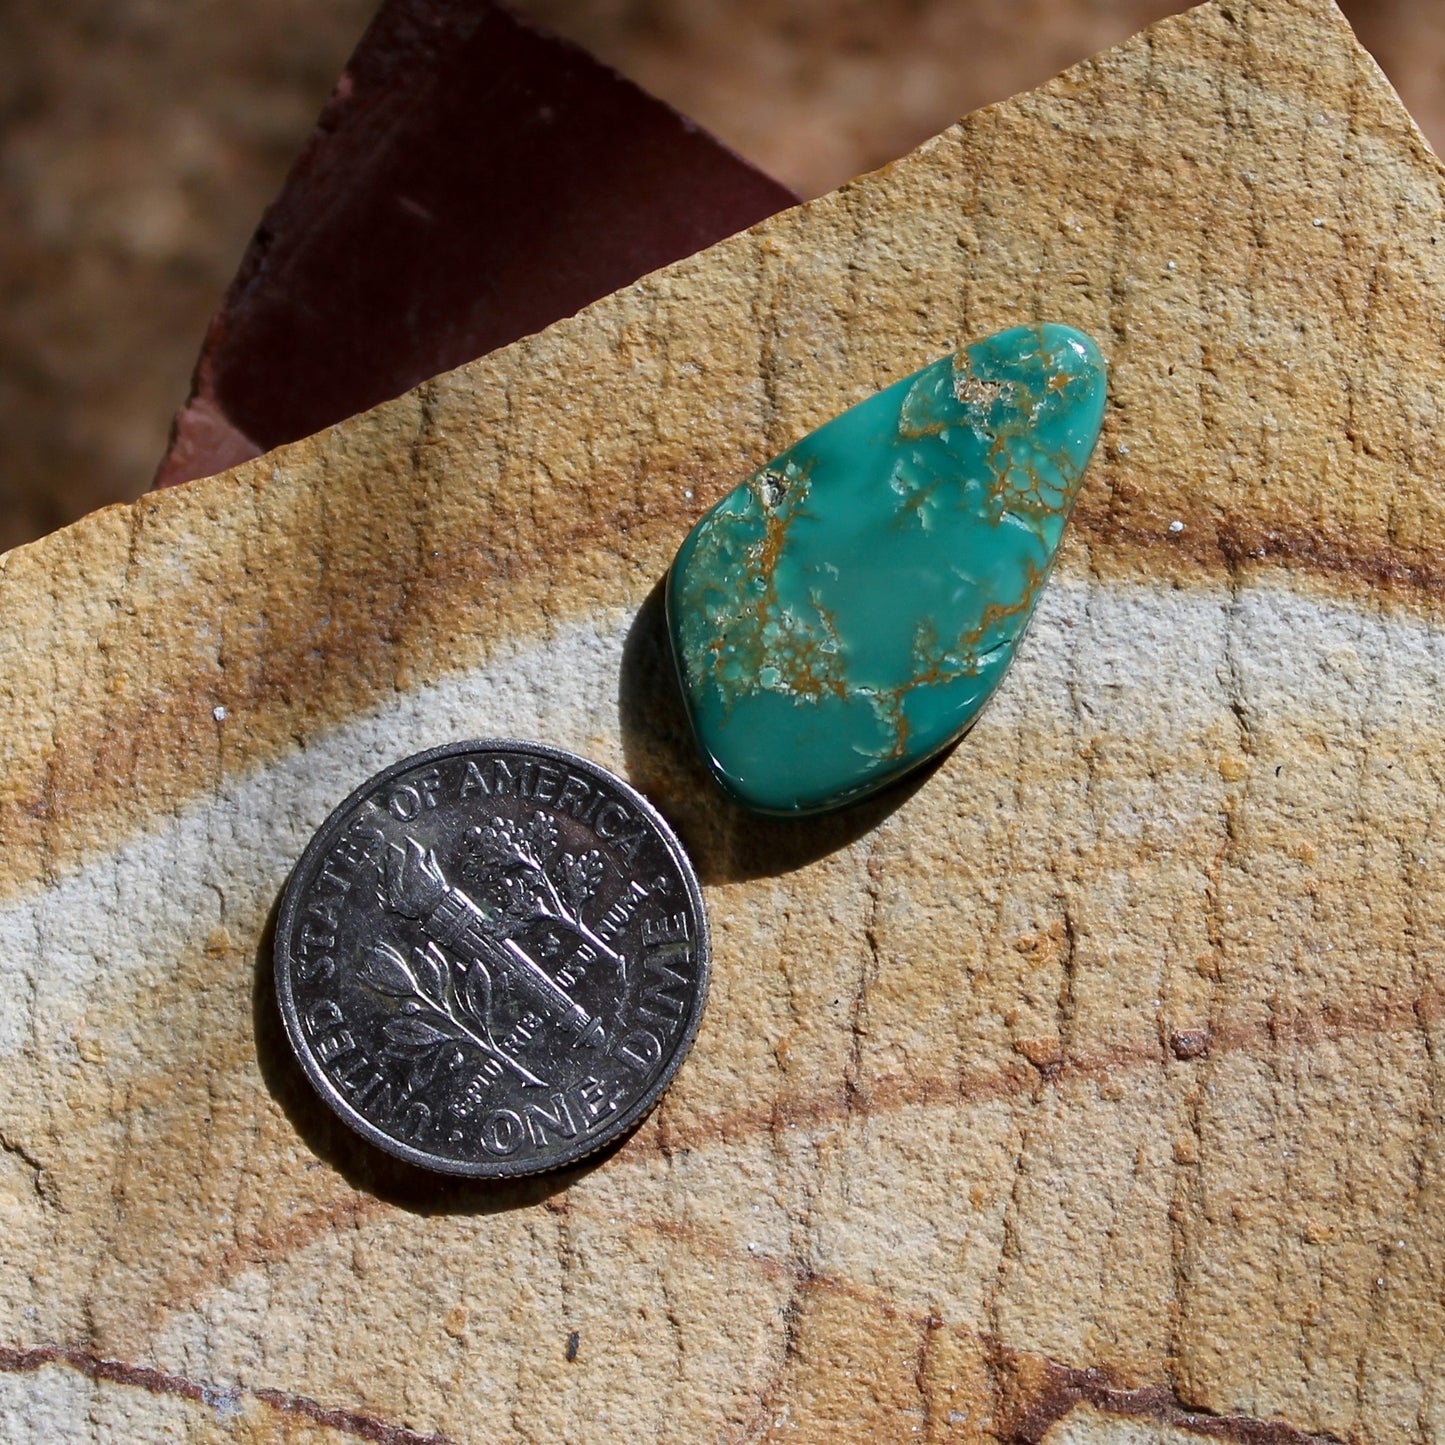 9.3 carat green Stone Mountain Turquoise cabochon with brown matrix